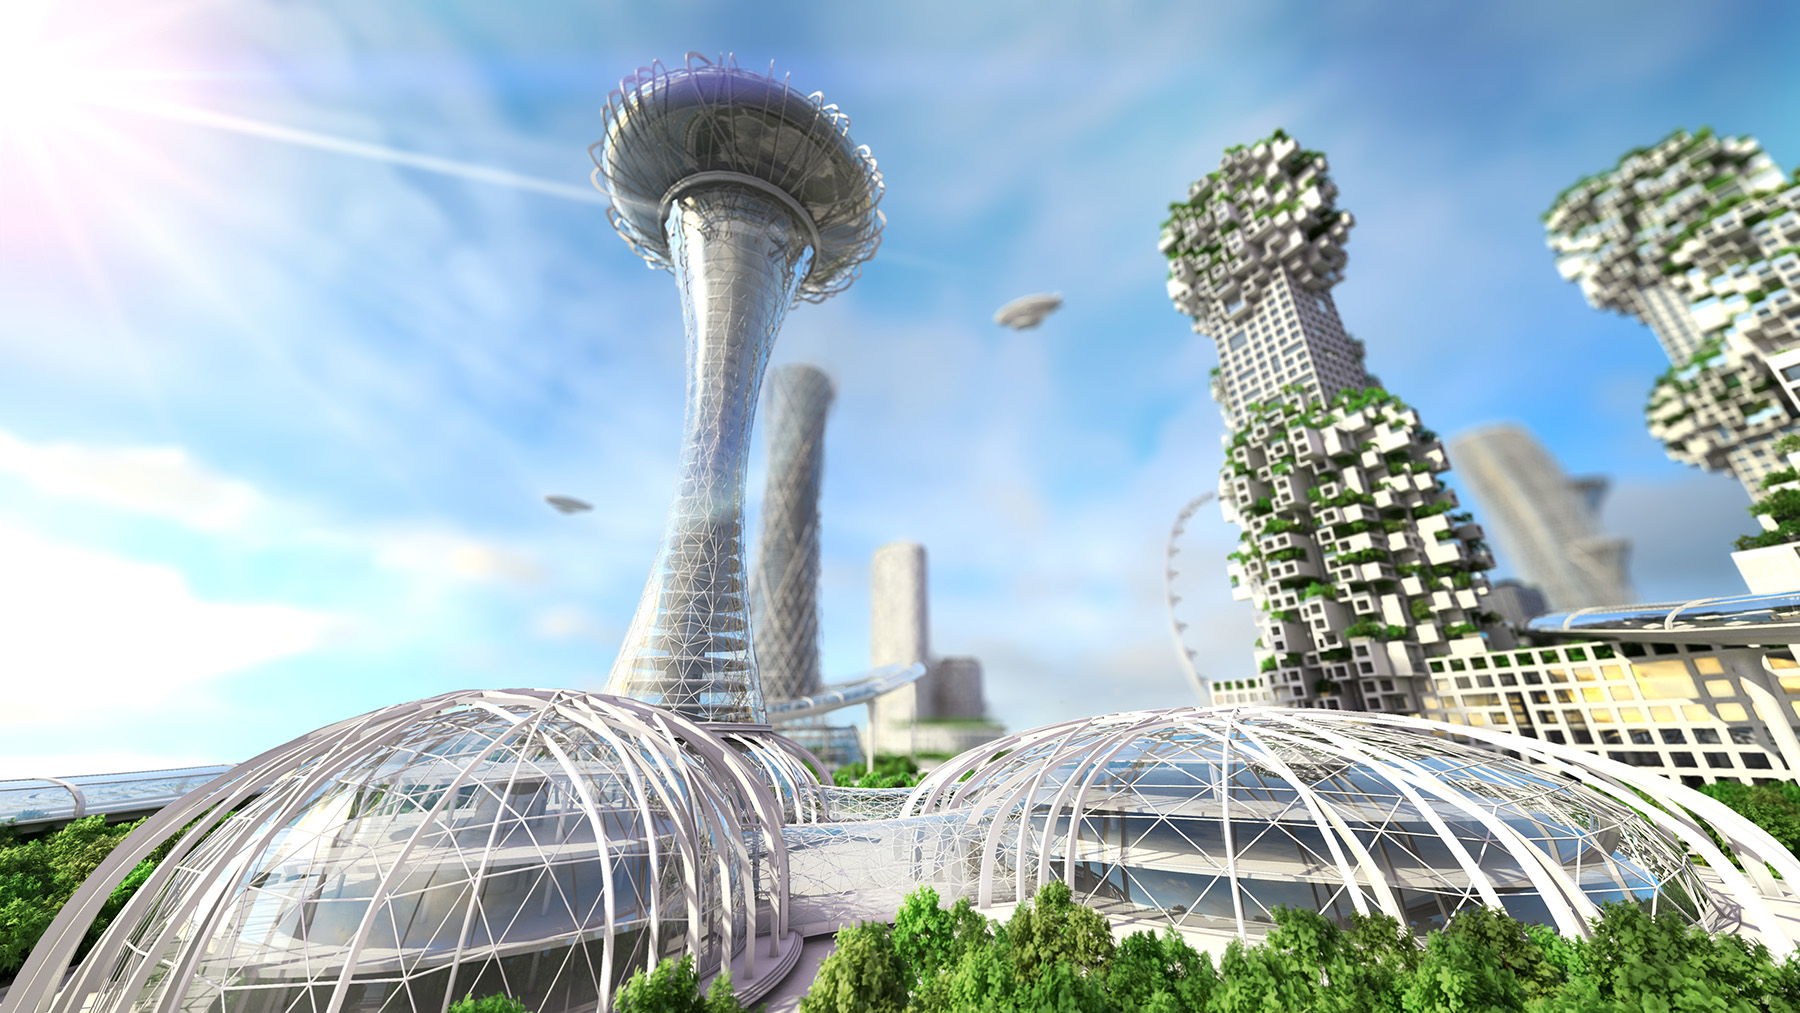 Futuristic city with flying vehicles, innovative architecture, and rapid transit. 